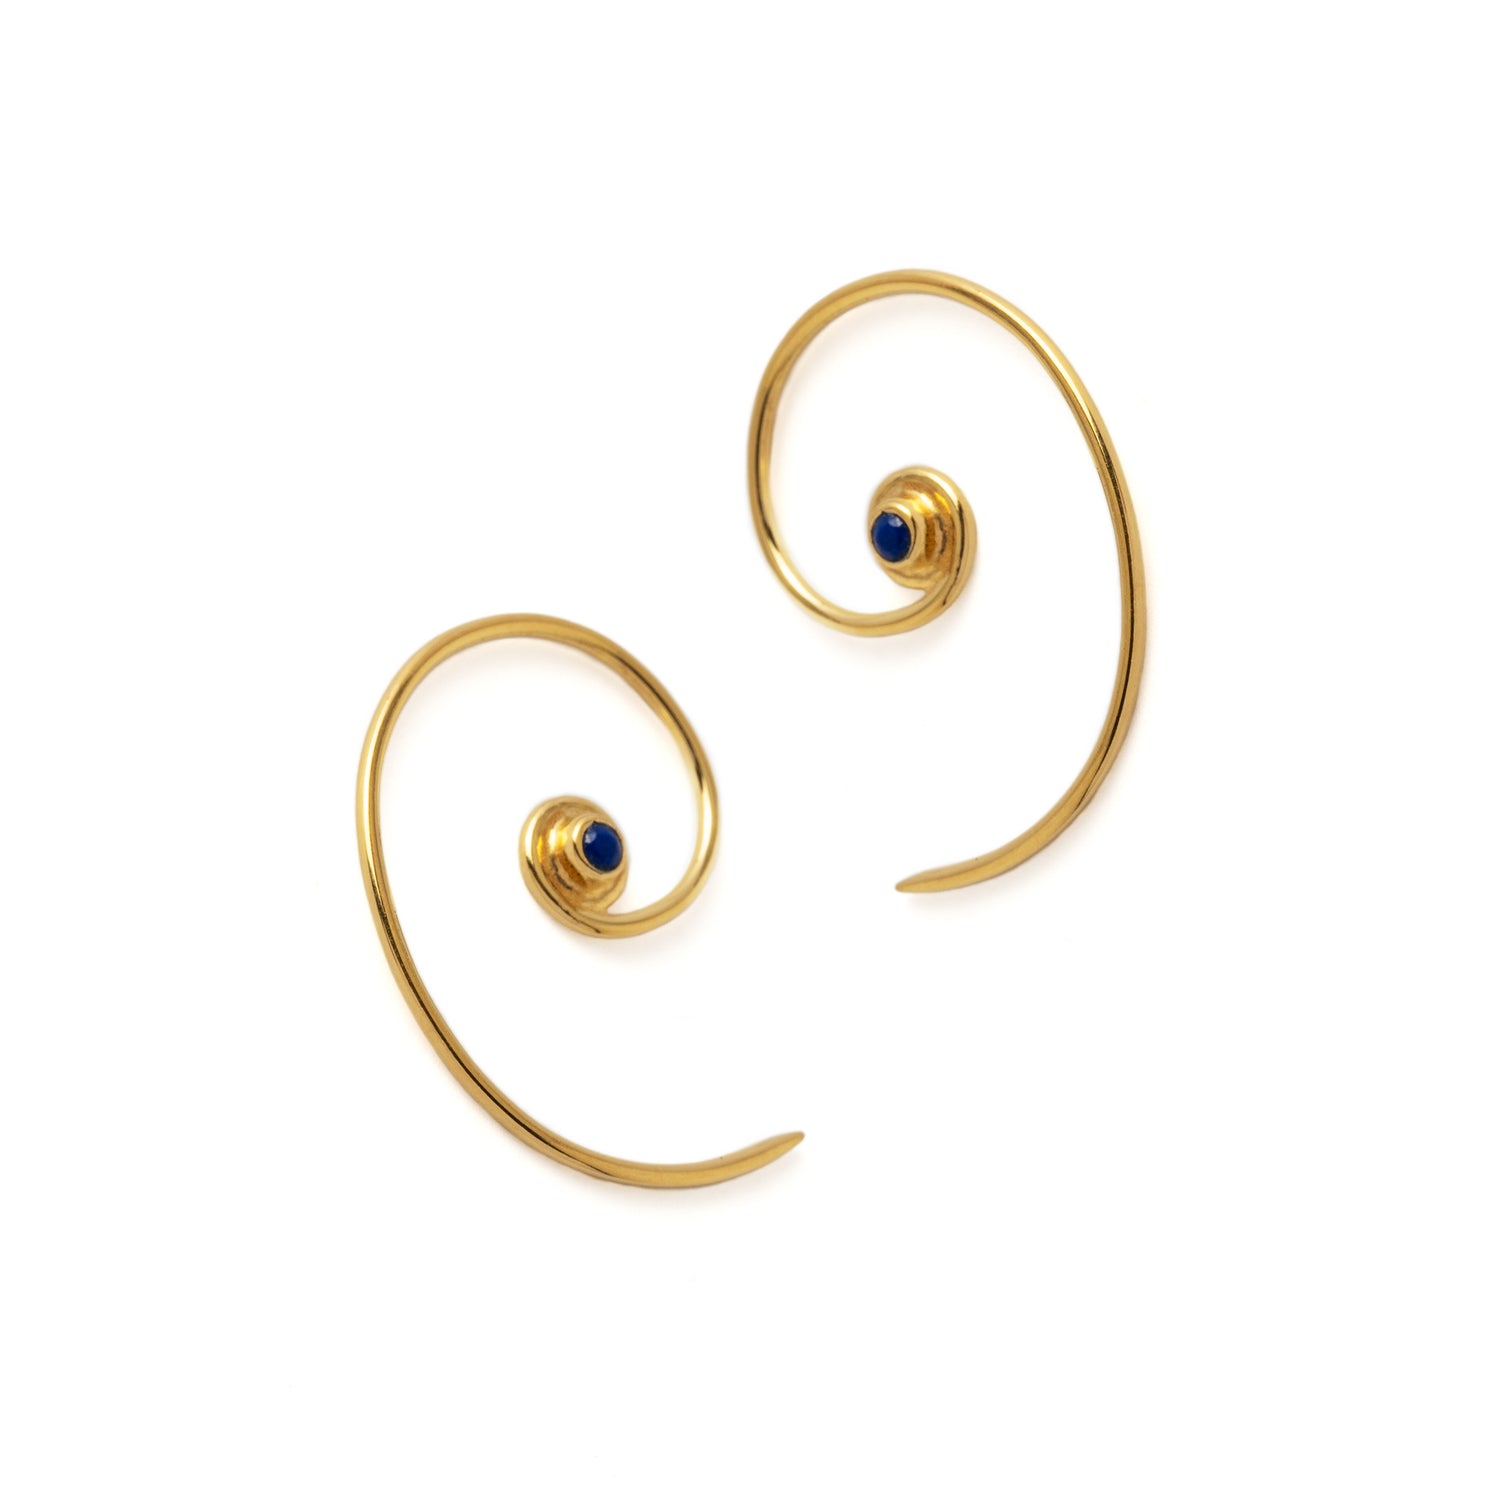 Gold &amp; Lapis Koru Earrings right and left view